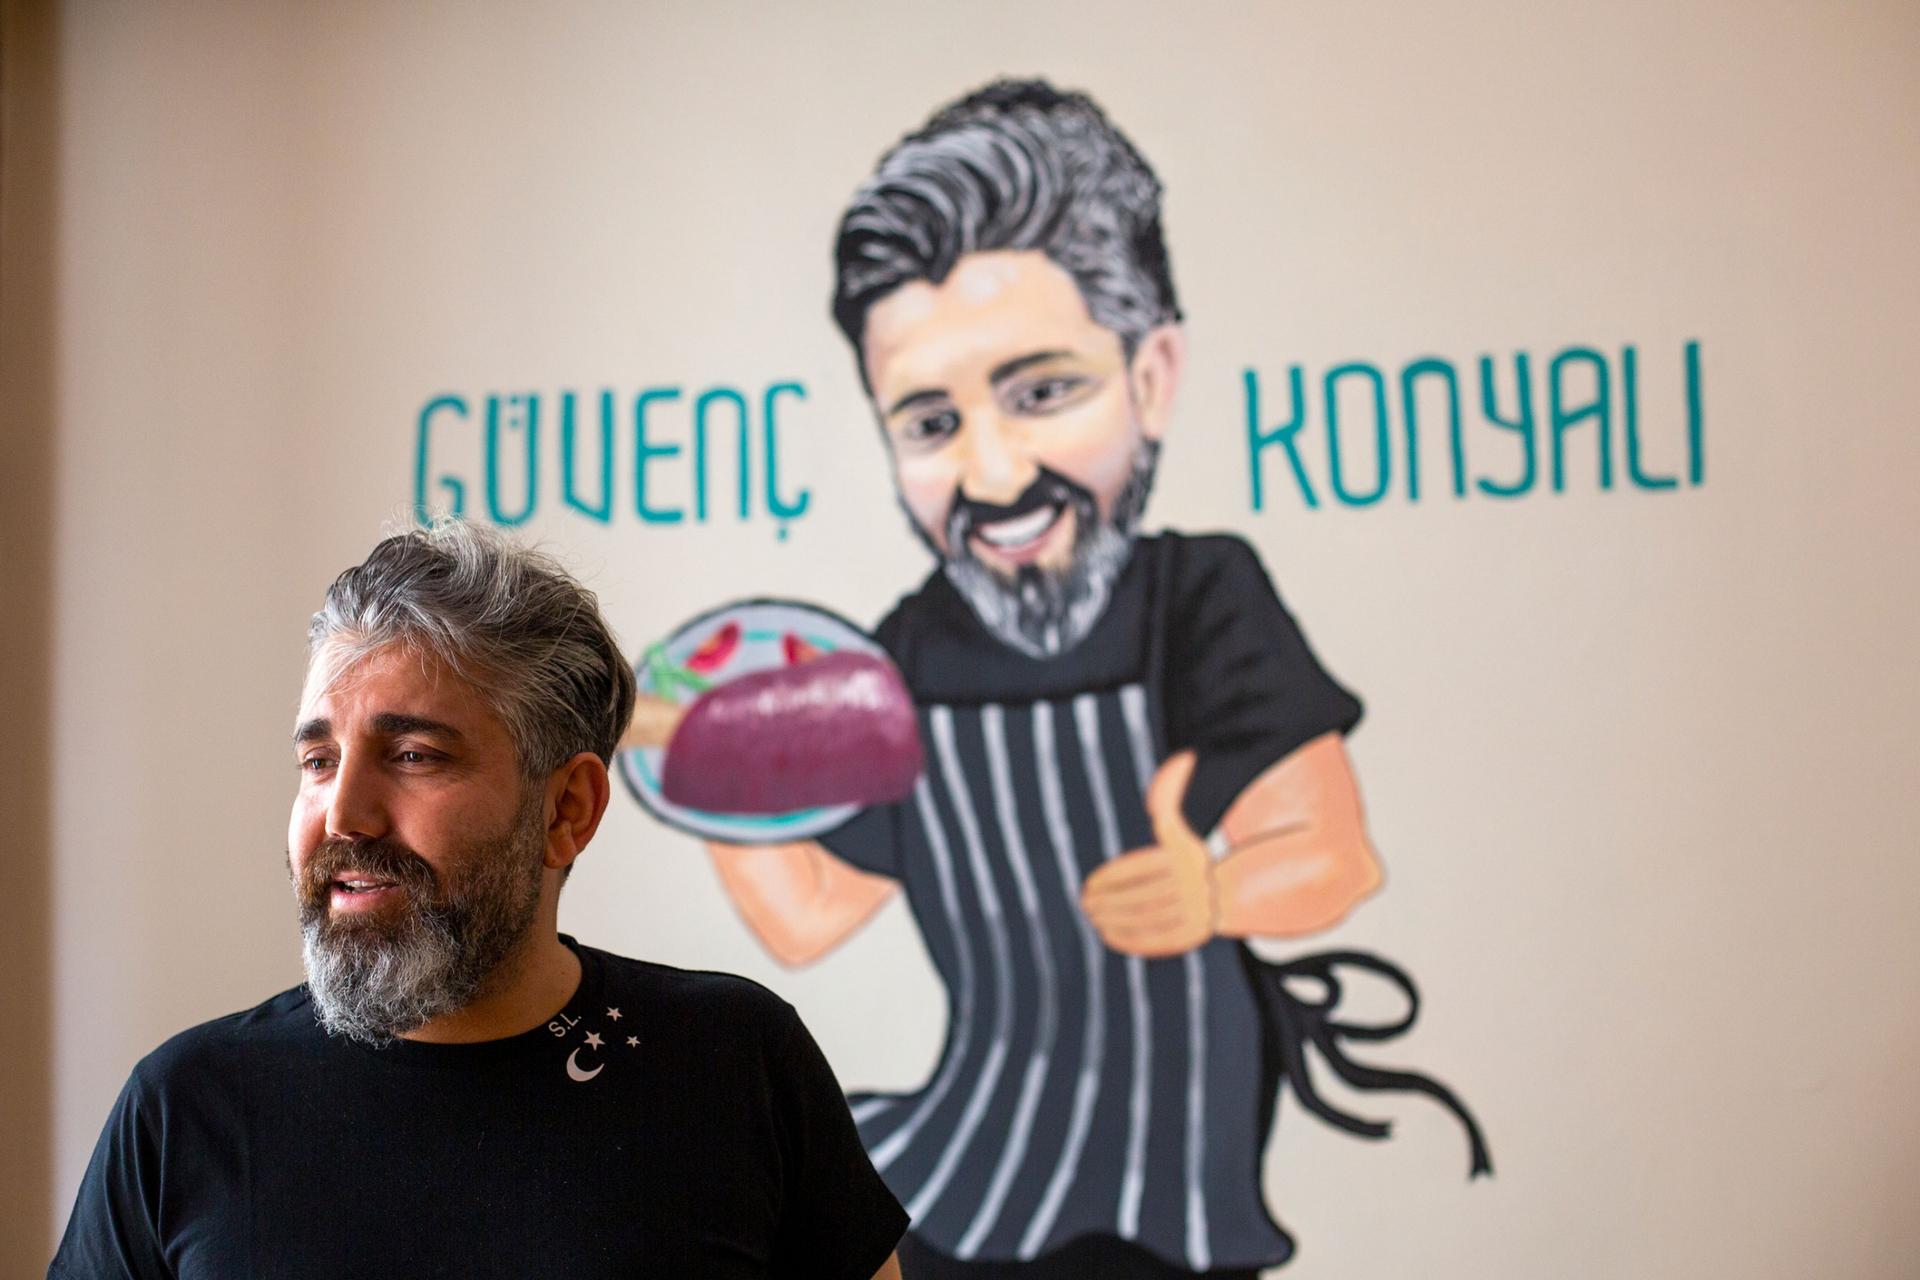 A man is shown with a salt and pepper beard and wearing a black shirt with an illustration of a chef behind him.